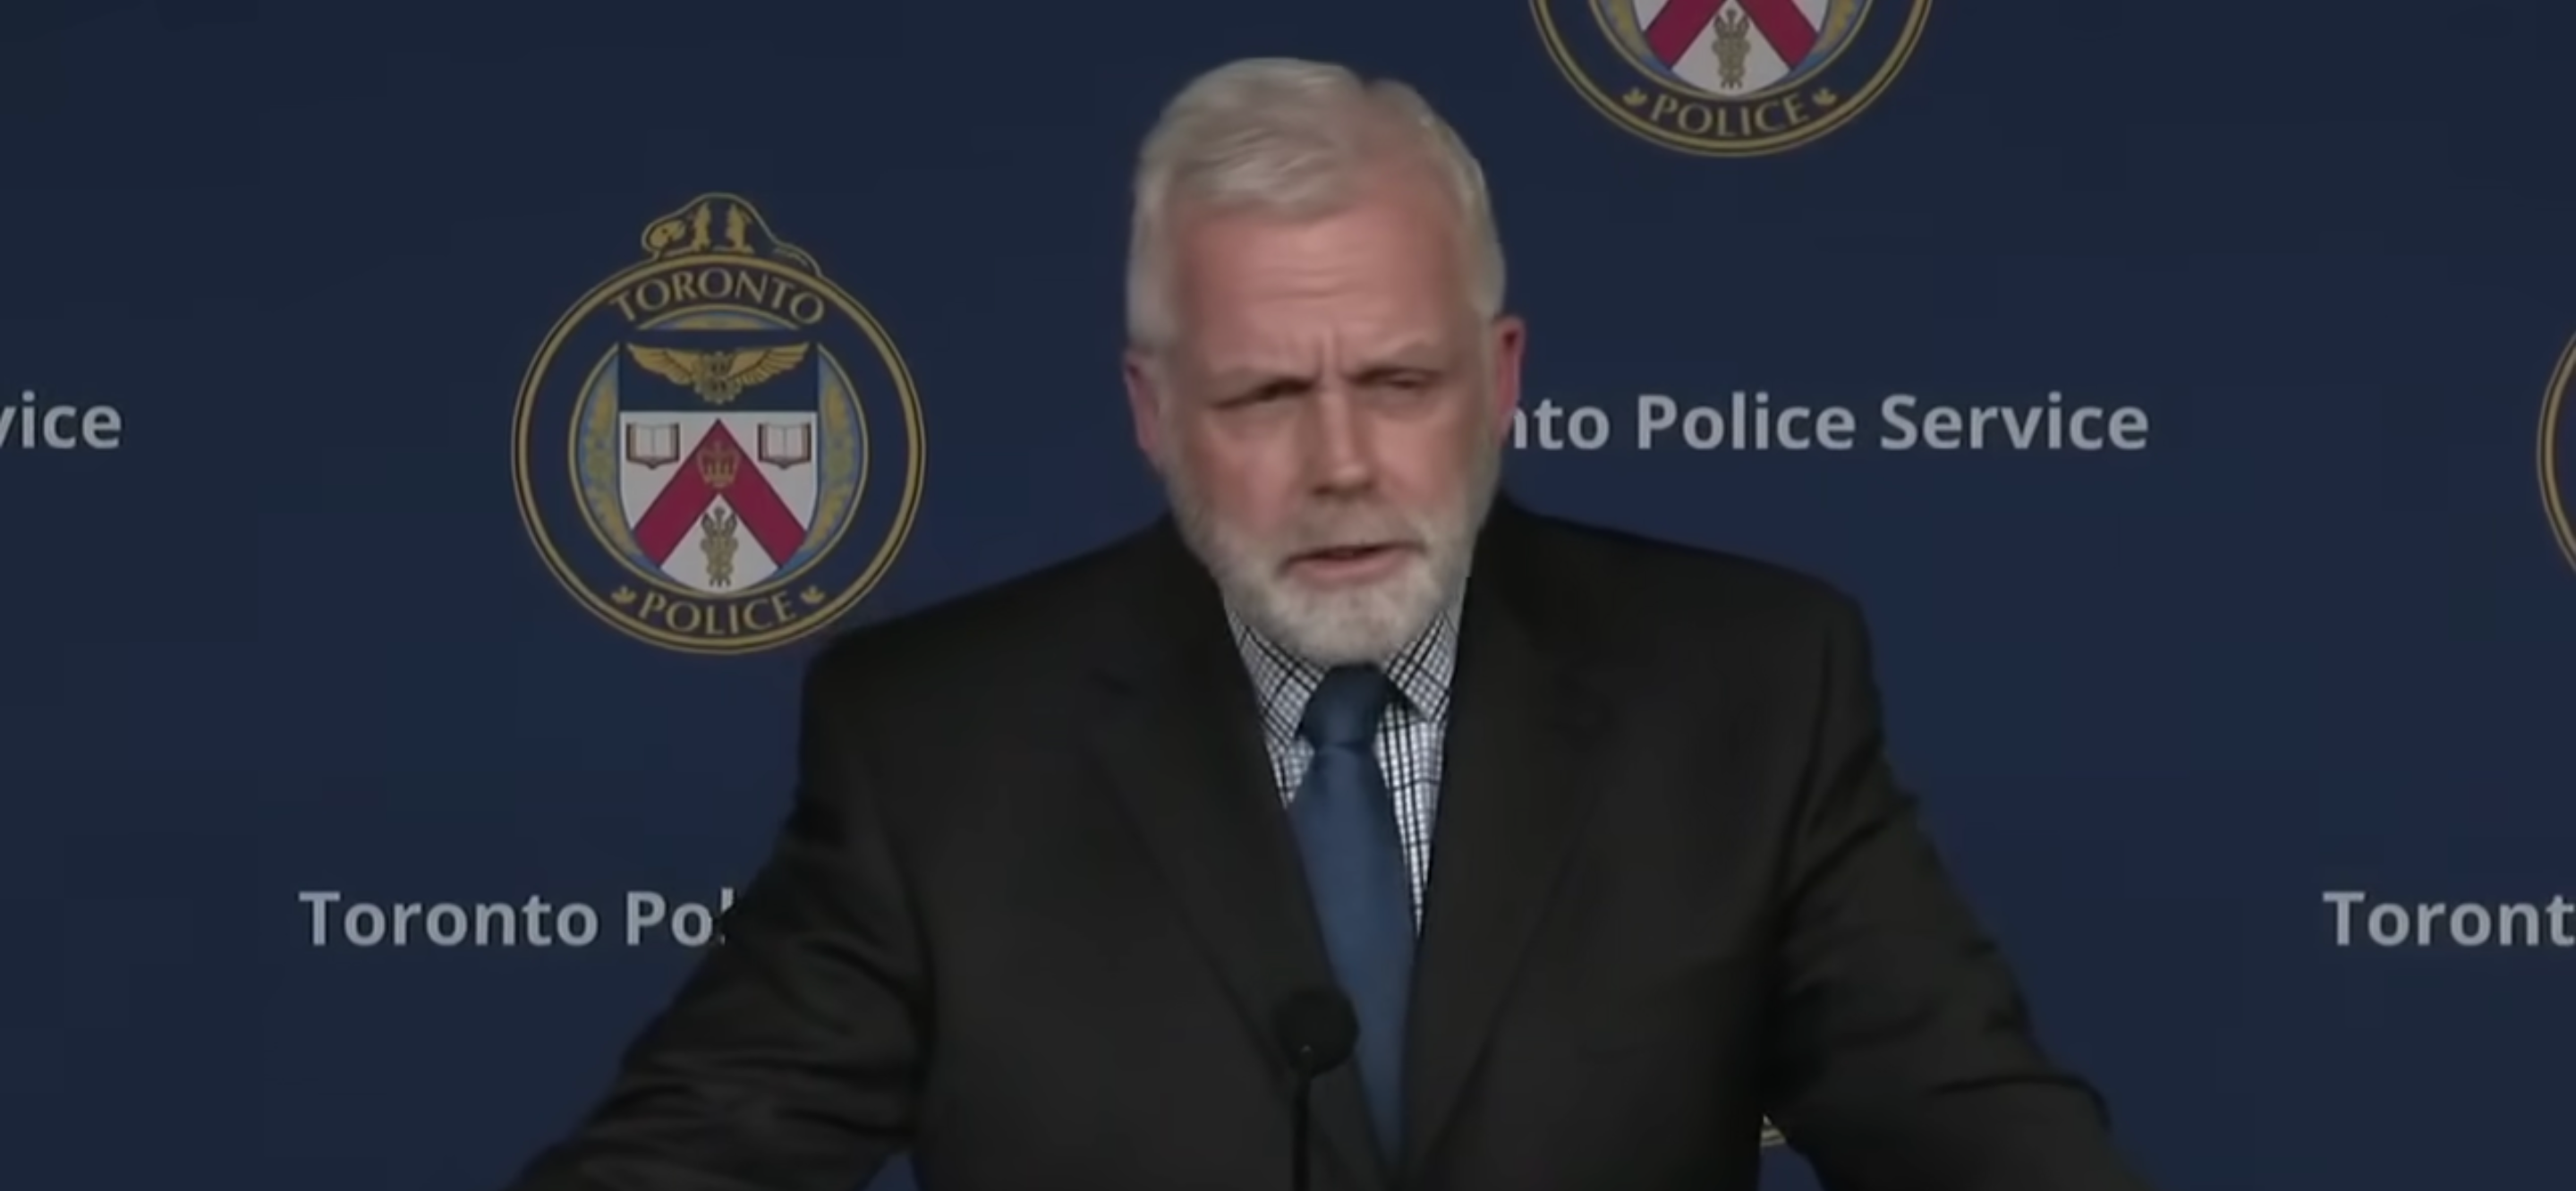 8 Teenage Girls Swarm & Attack Homeless Person In Toronto, Leading To Murder